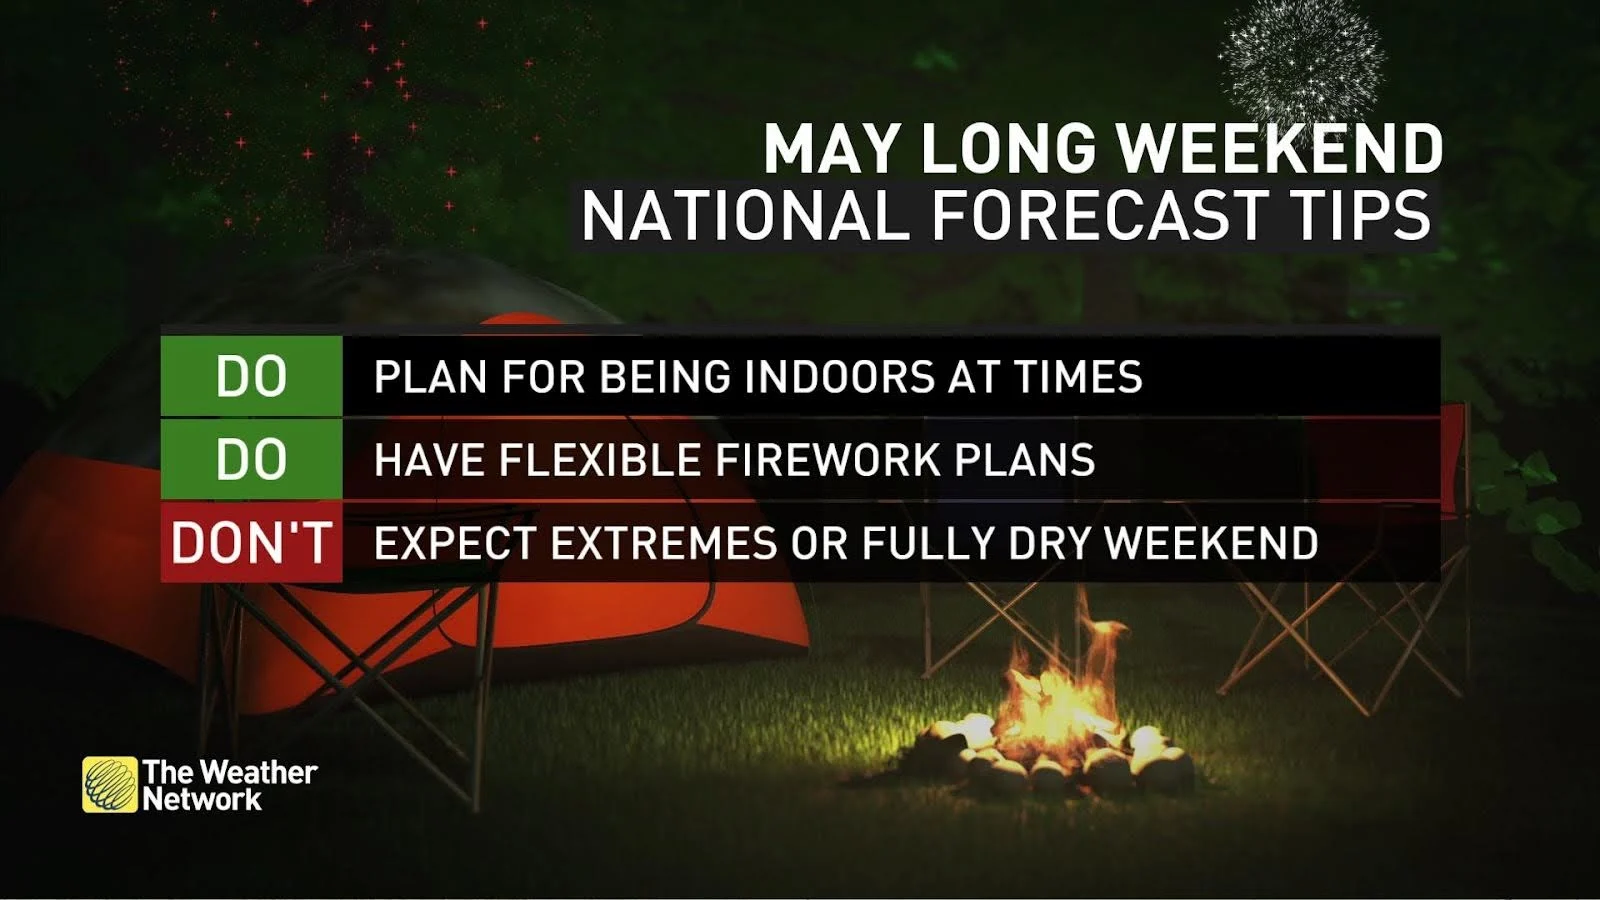 May long weekend outlook forecast tips